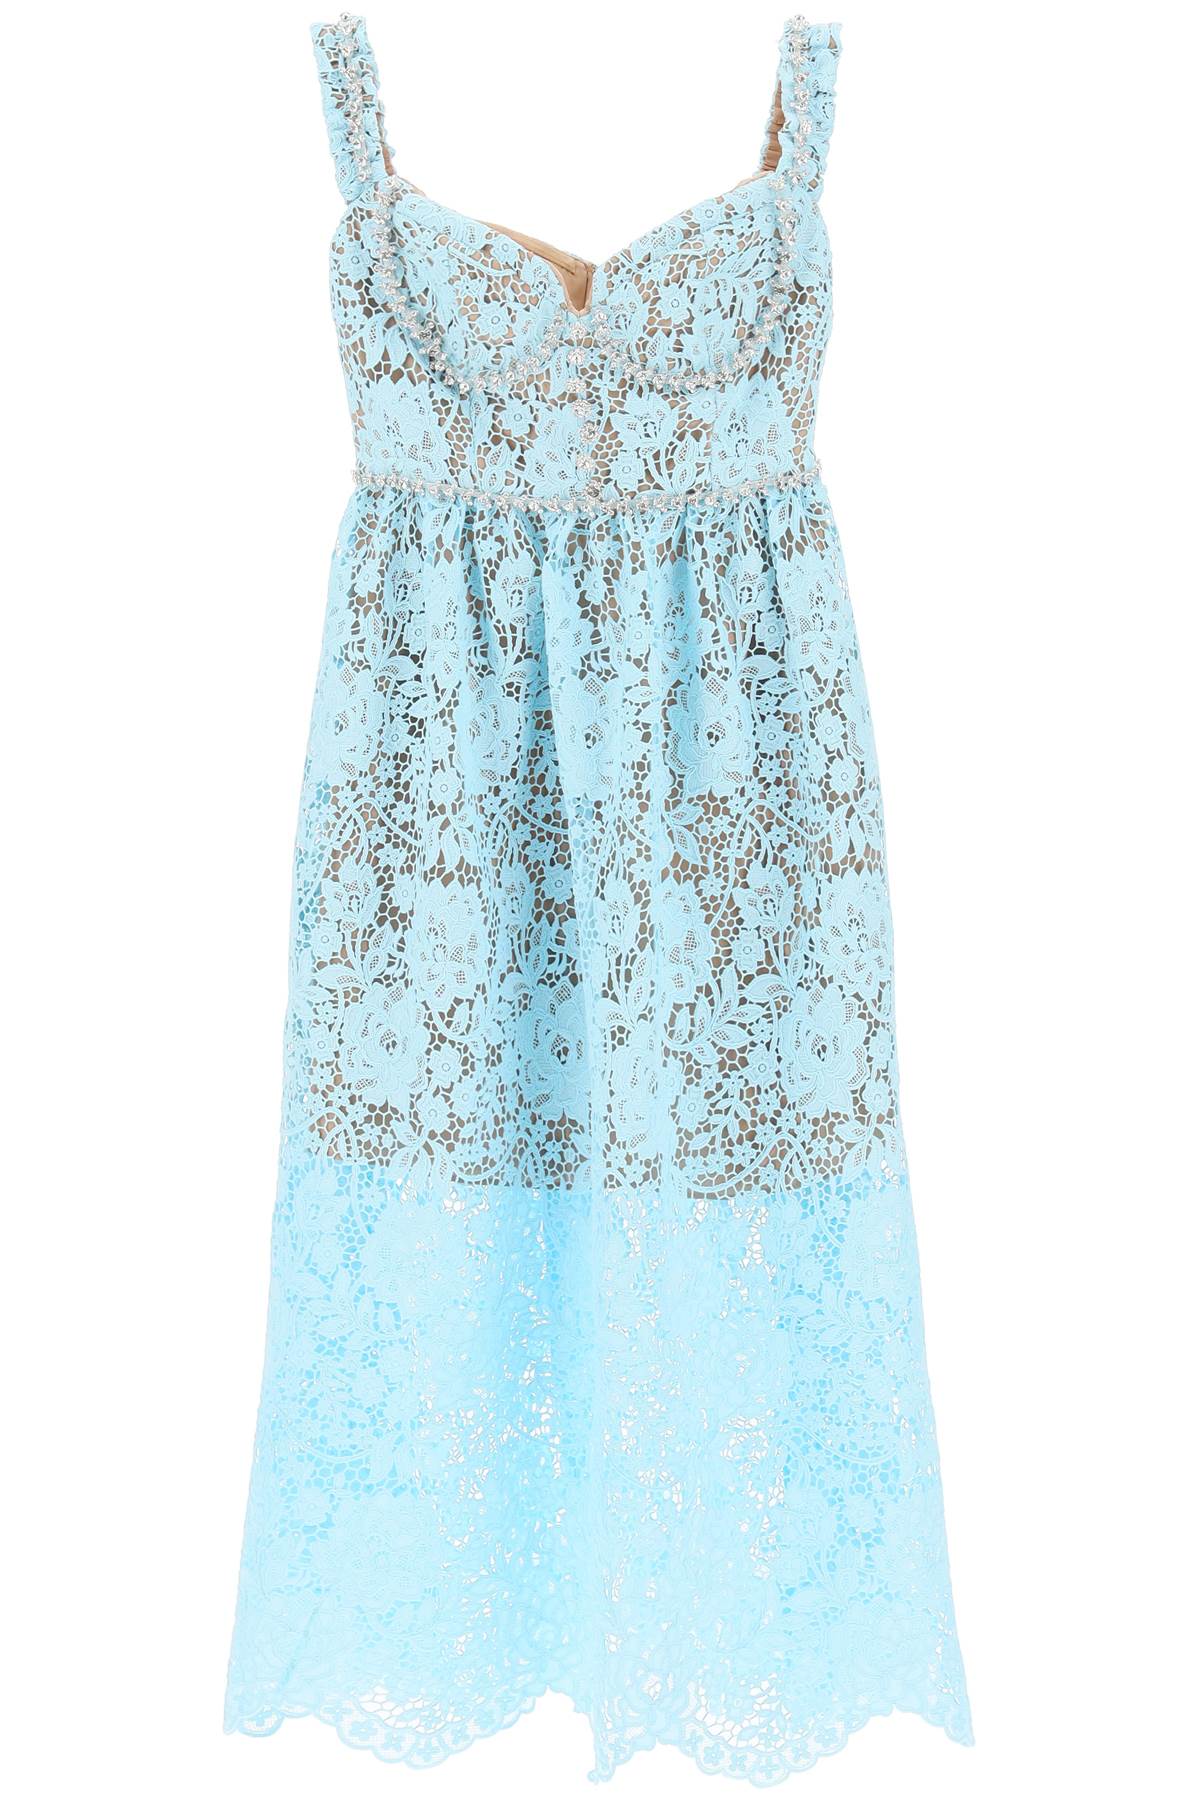 BRA632 midi dress in floral lace with crystals